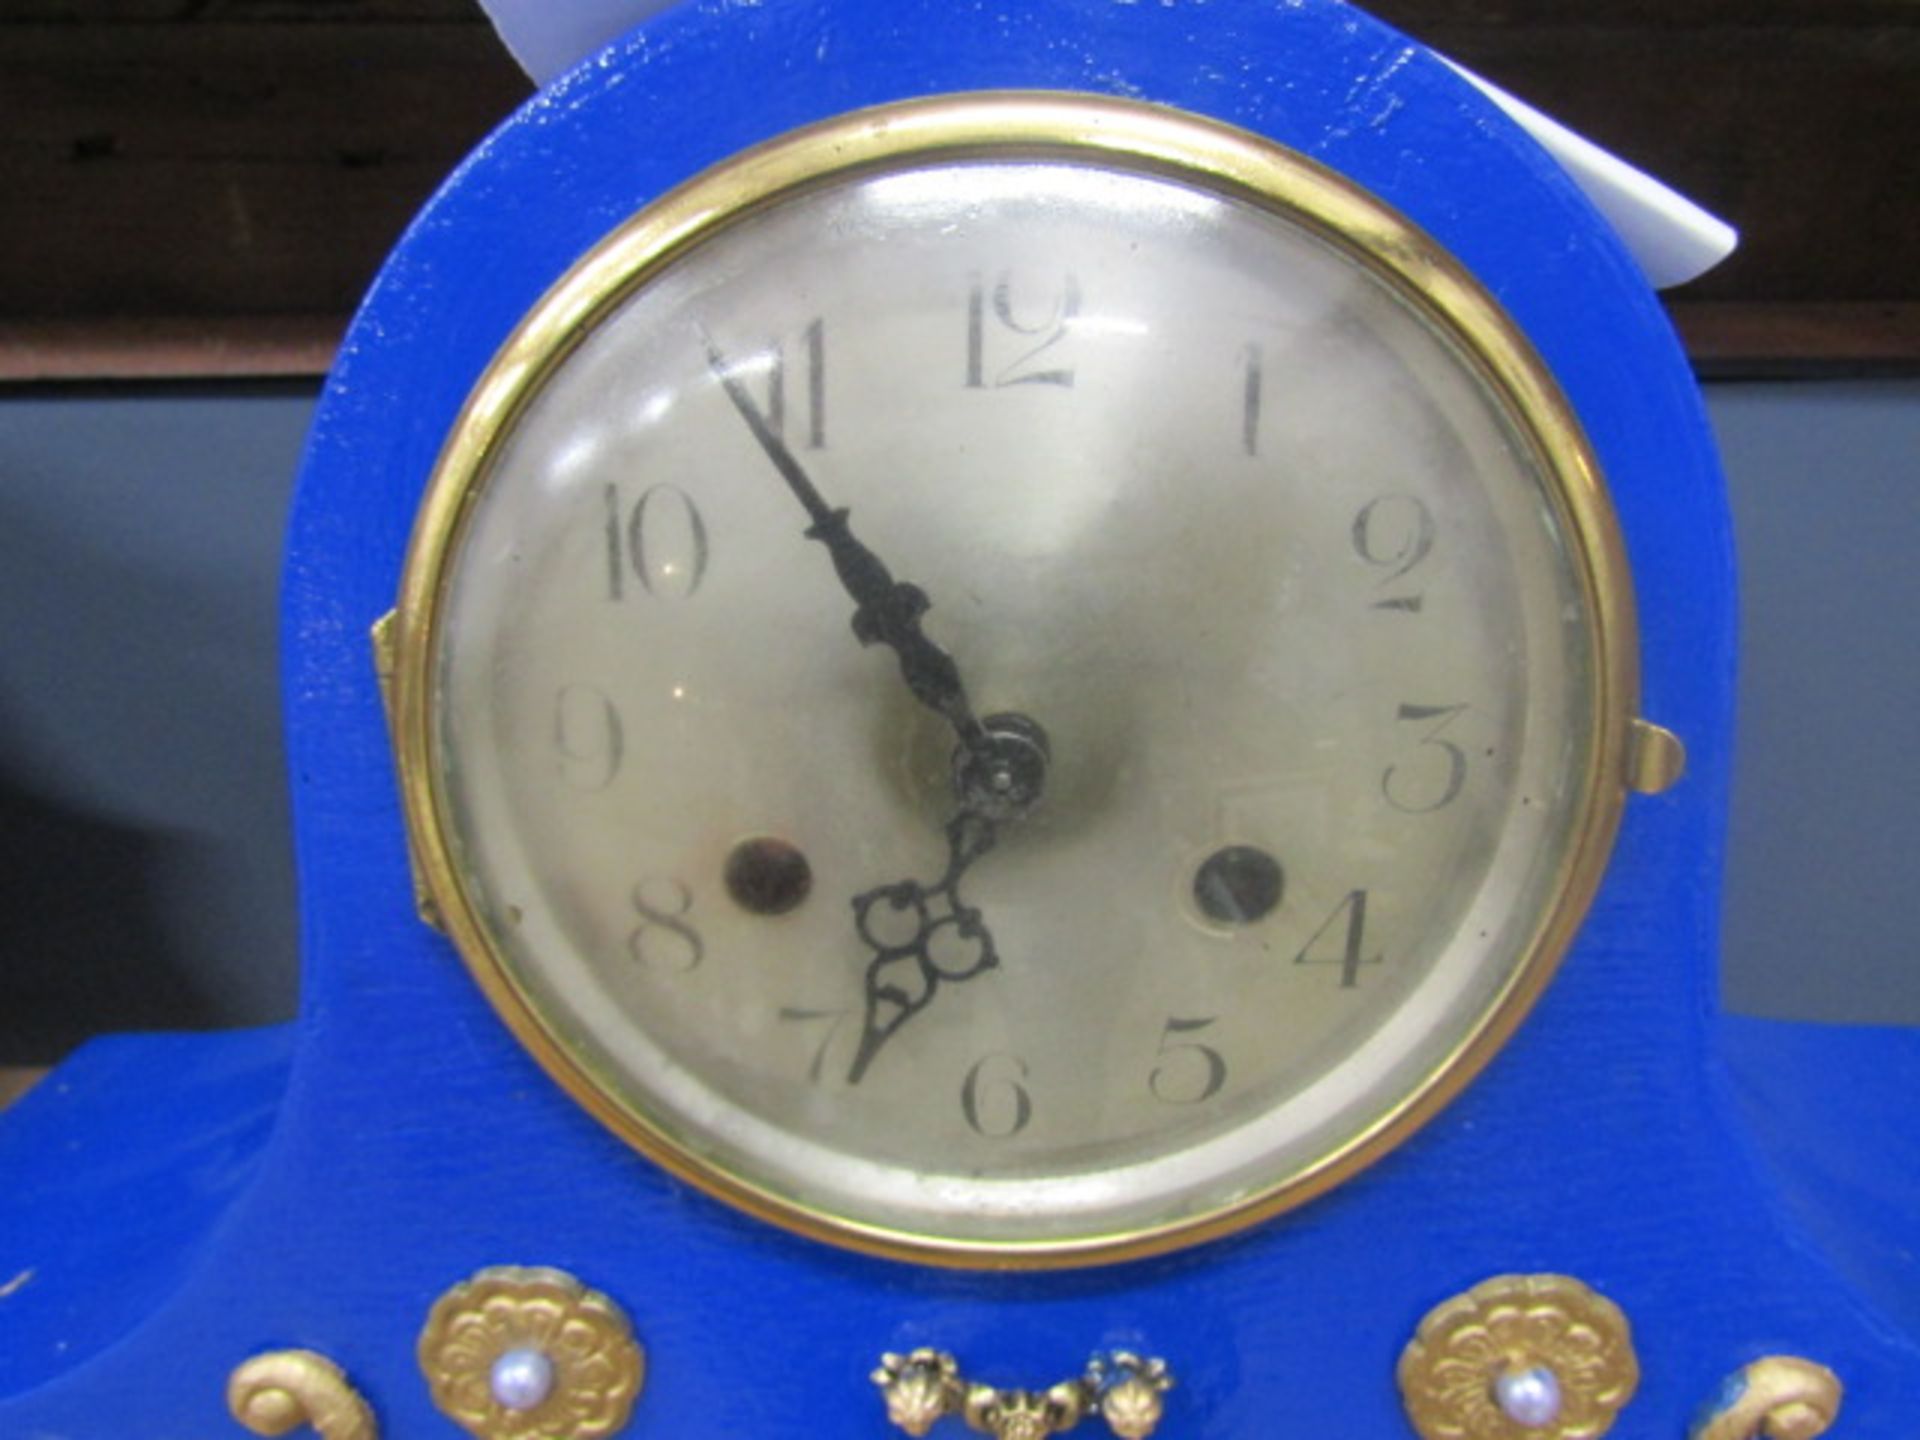 Napoleon mantle clock painted blue in working order with key - Image 2 of 2